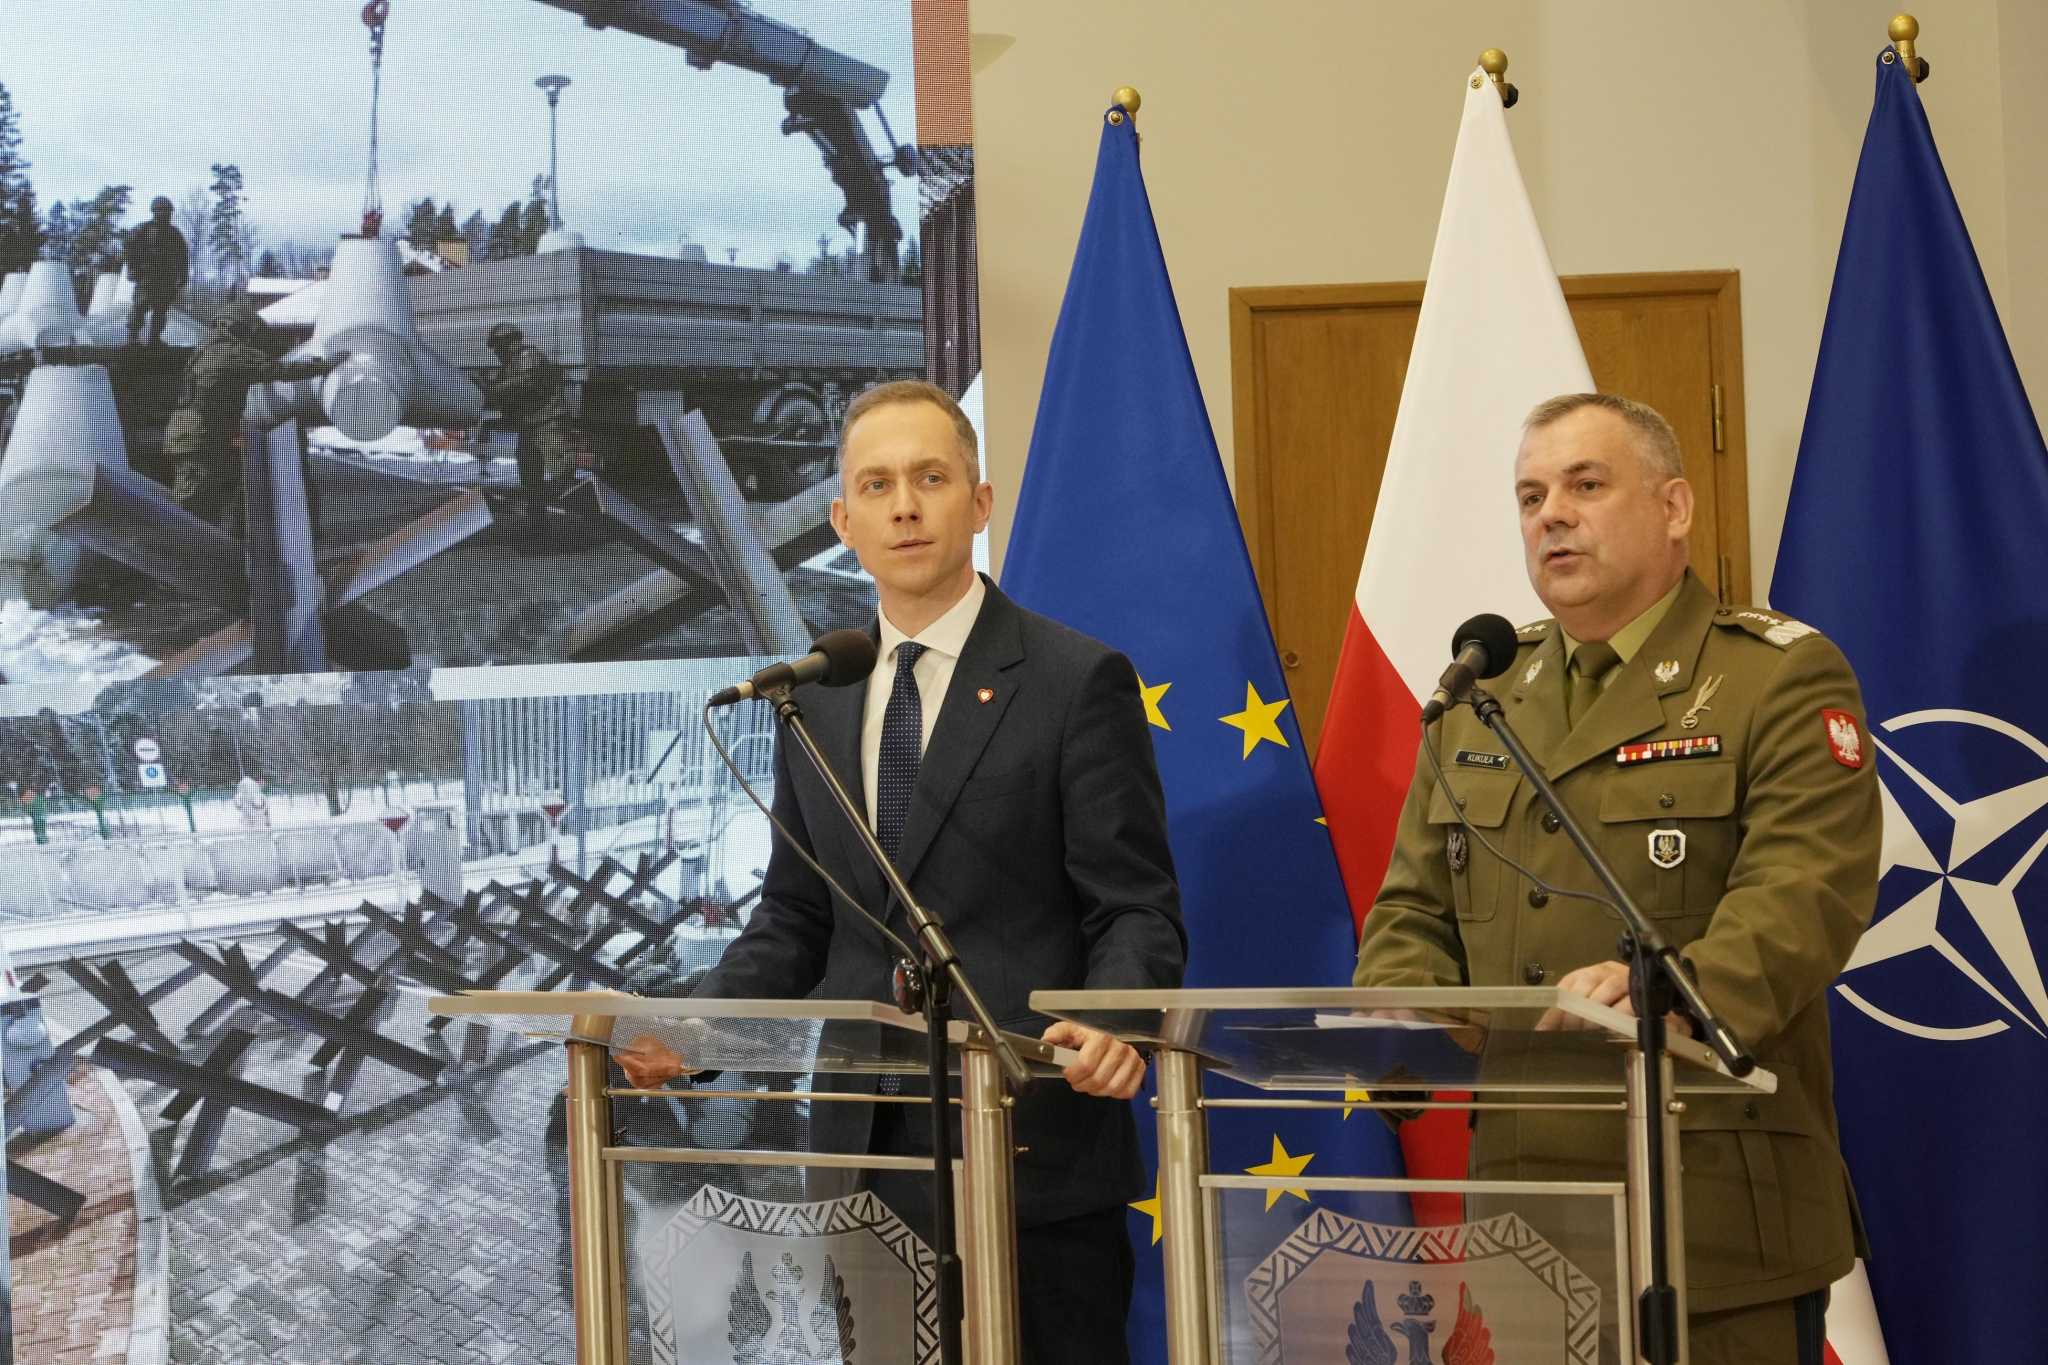 Poland rolls out plans for fortifications along its border with Russia and Belarus